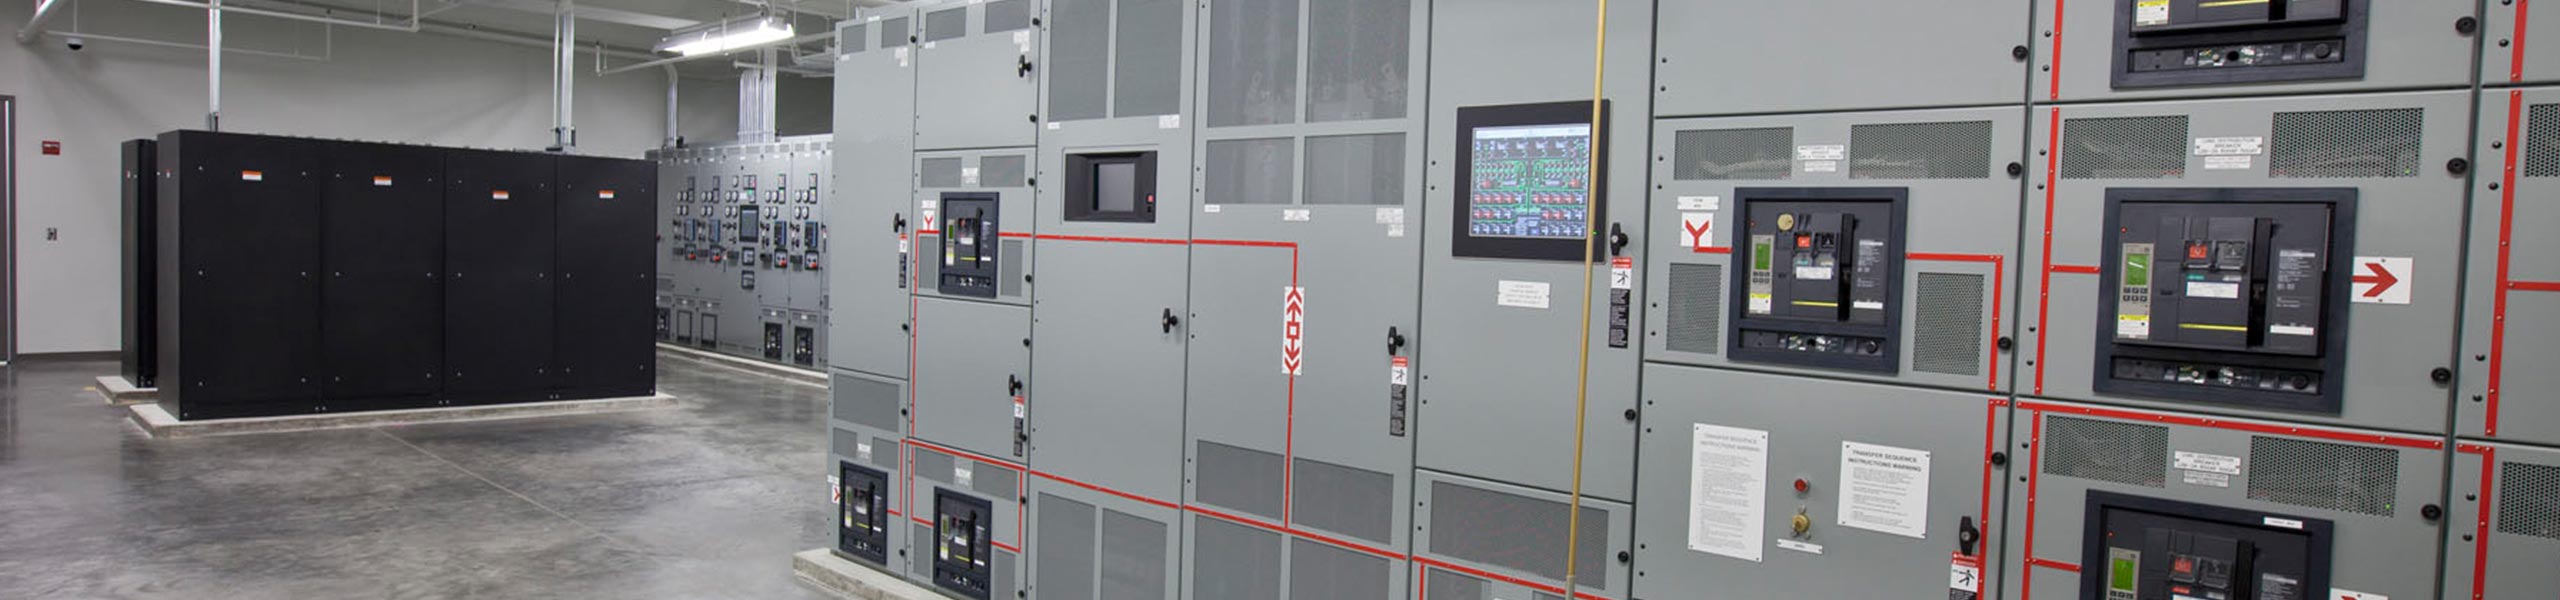 ASCO 7000 series power control system paralleling switchgear